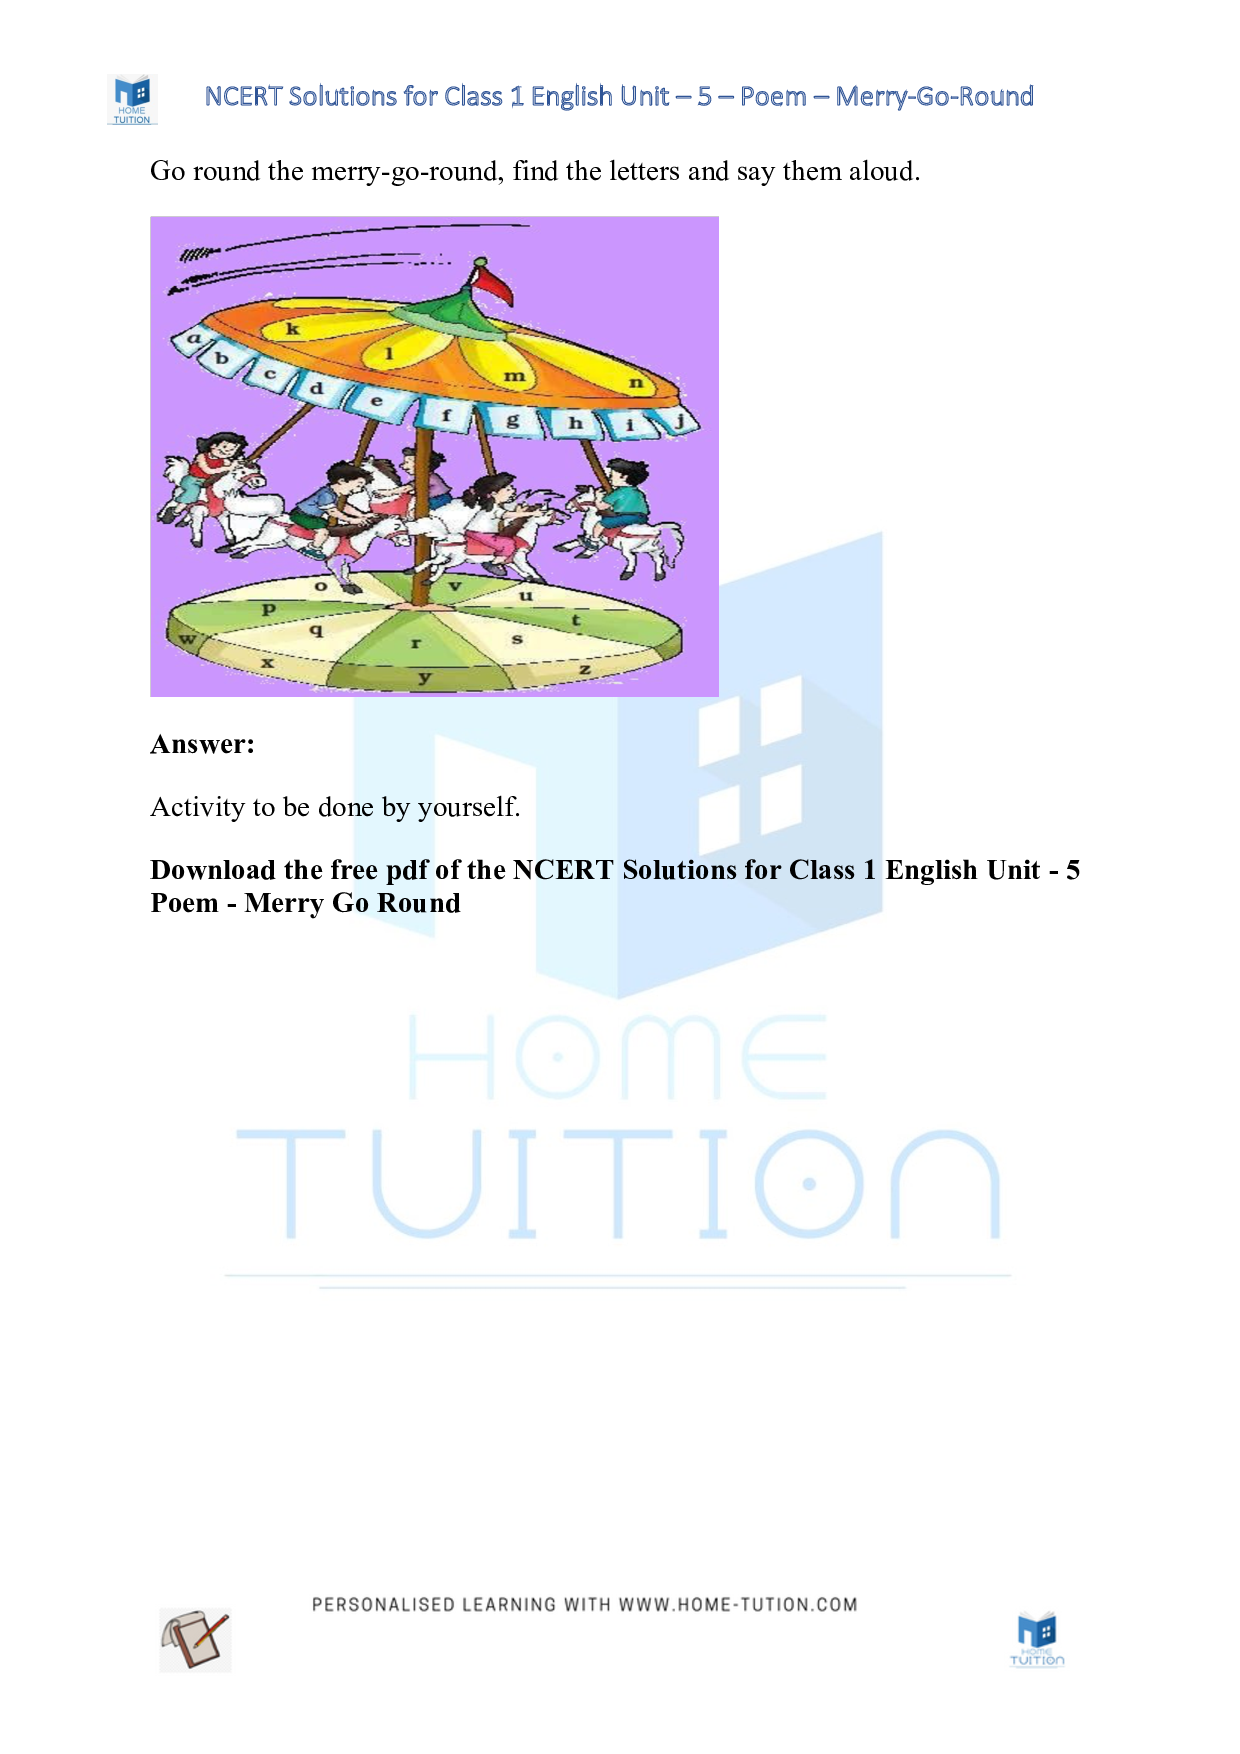 NCERT Solutions for Class 1 English Unit 5 Poem - Merry Go Round